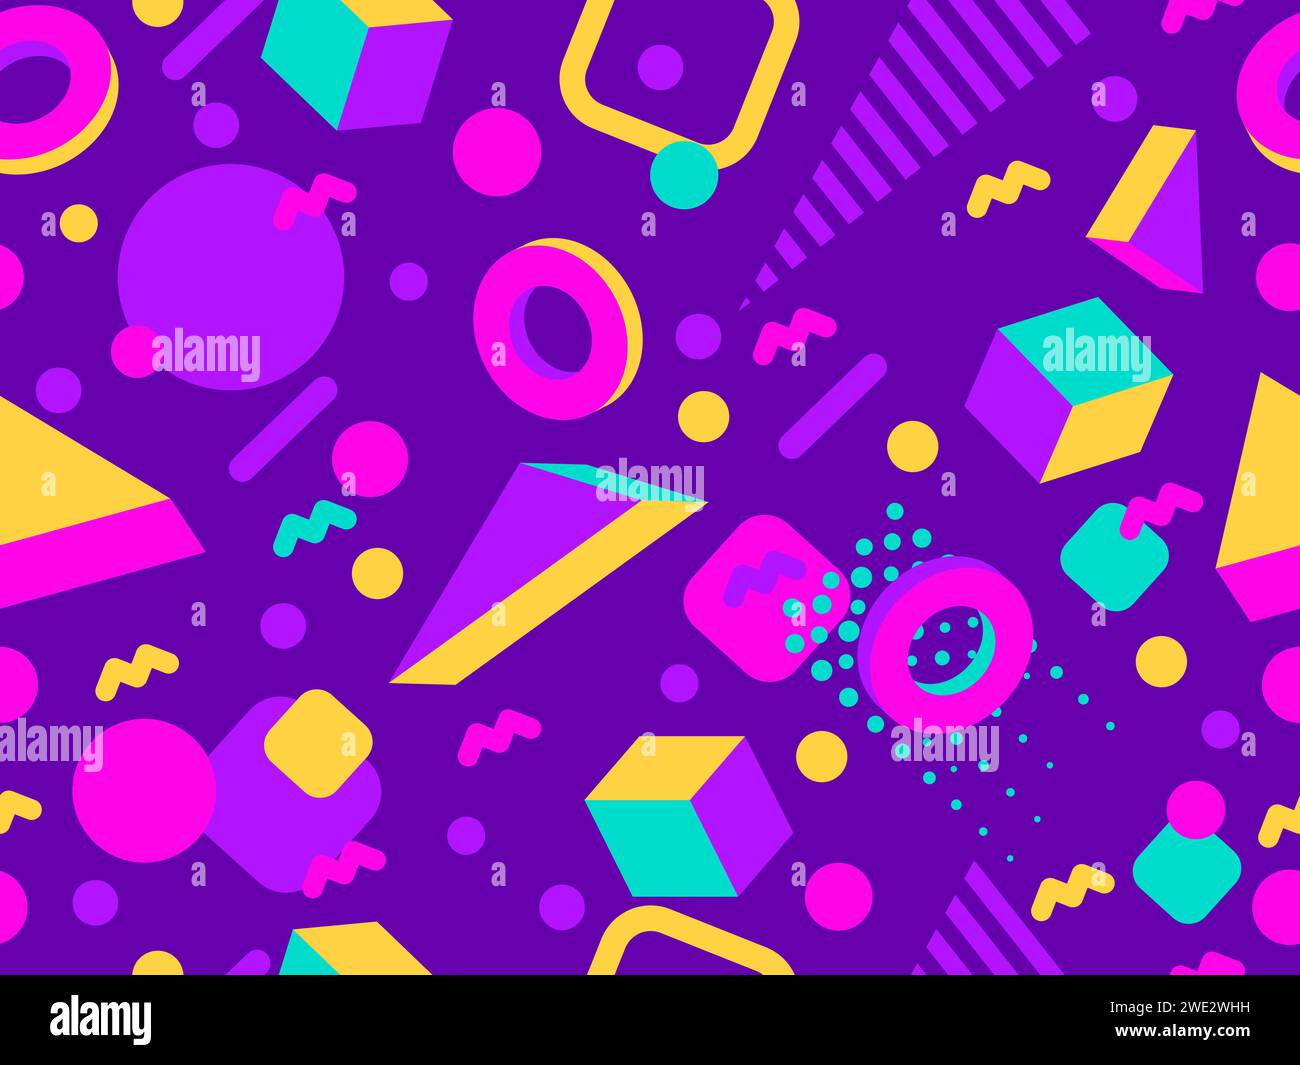 Memphis seamless pattern with 3d geometric shapes in 80s style. Colorful geometric pattern with isometric 3d shapes. Design of promotional products, w Stock Vector